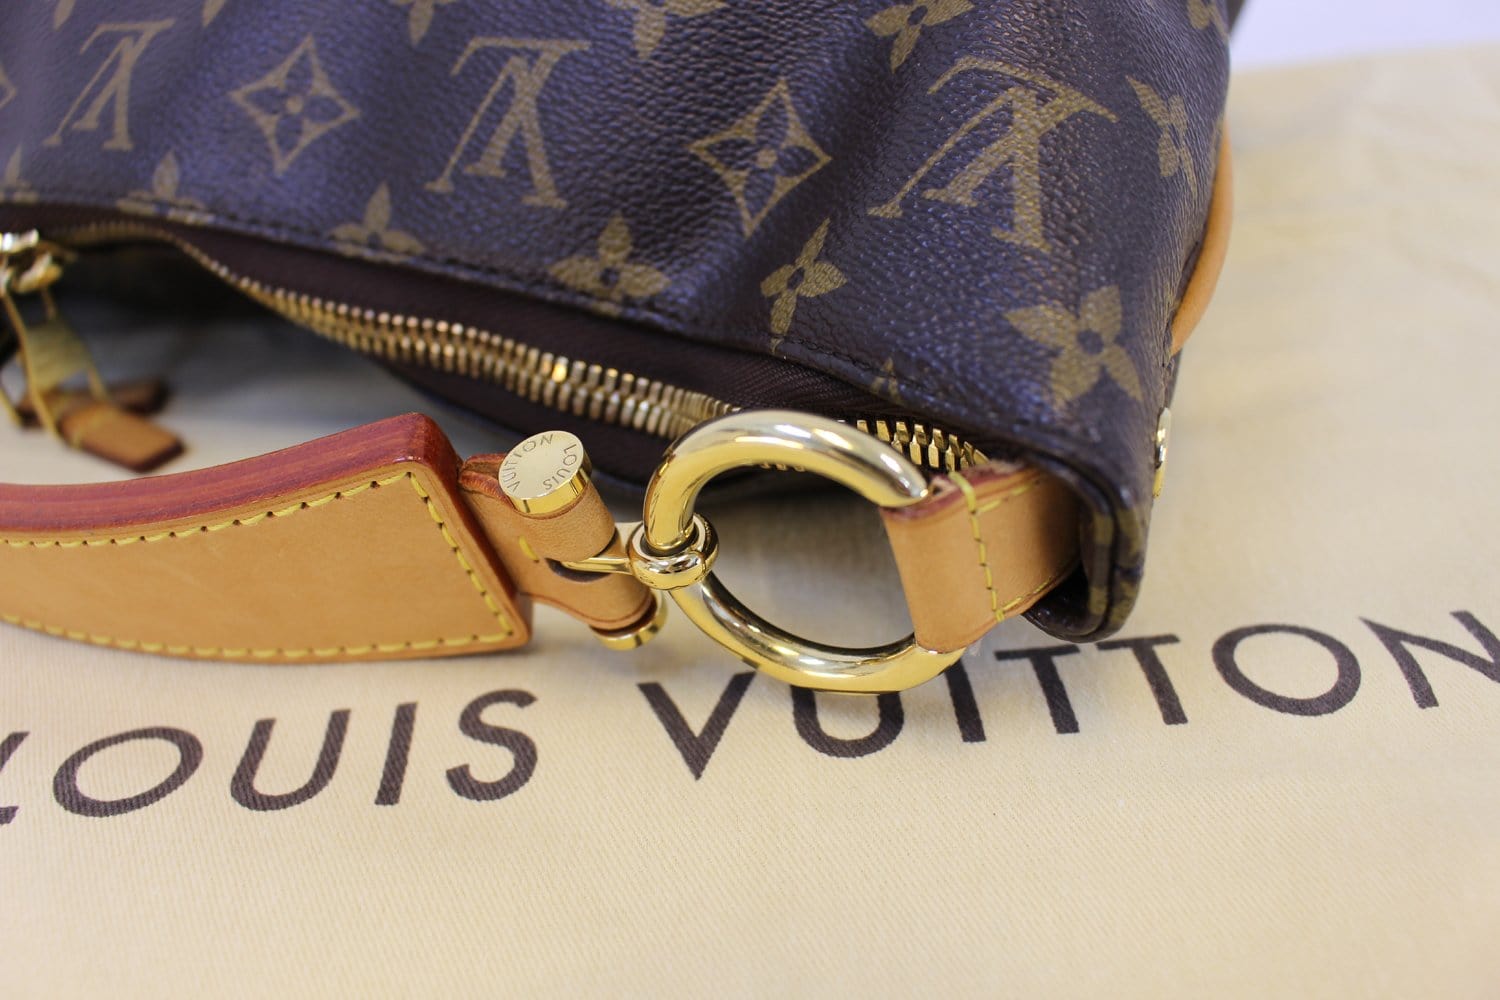 Louis Vuitton Sully Pm Shoulder Bag Authenticated By Lxr